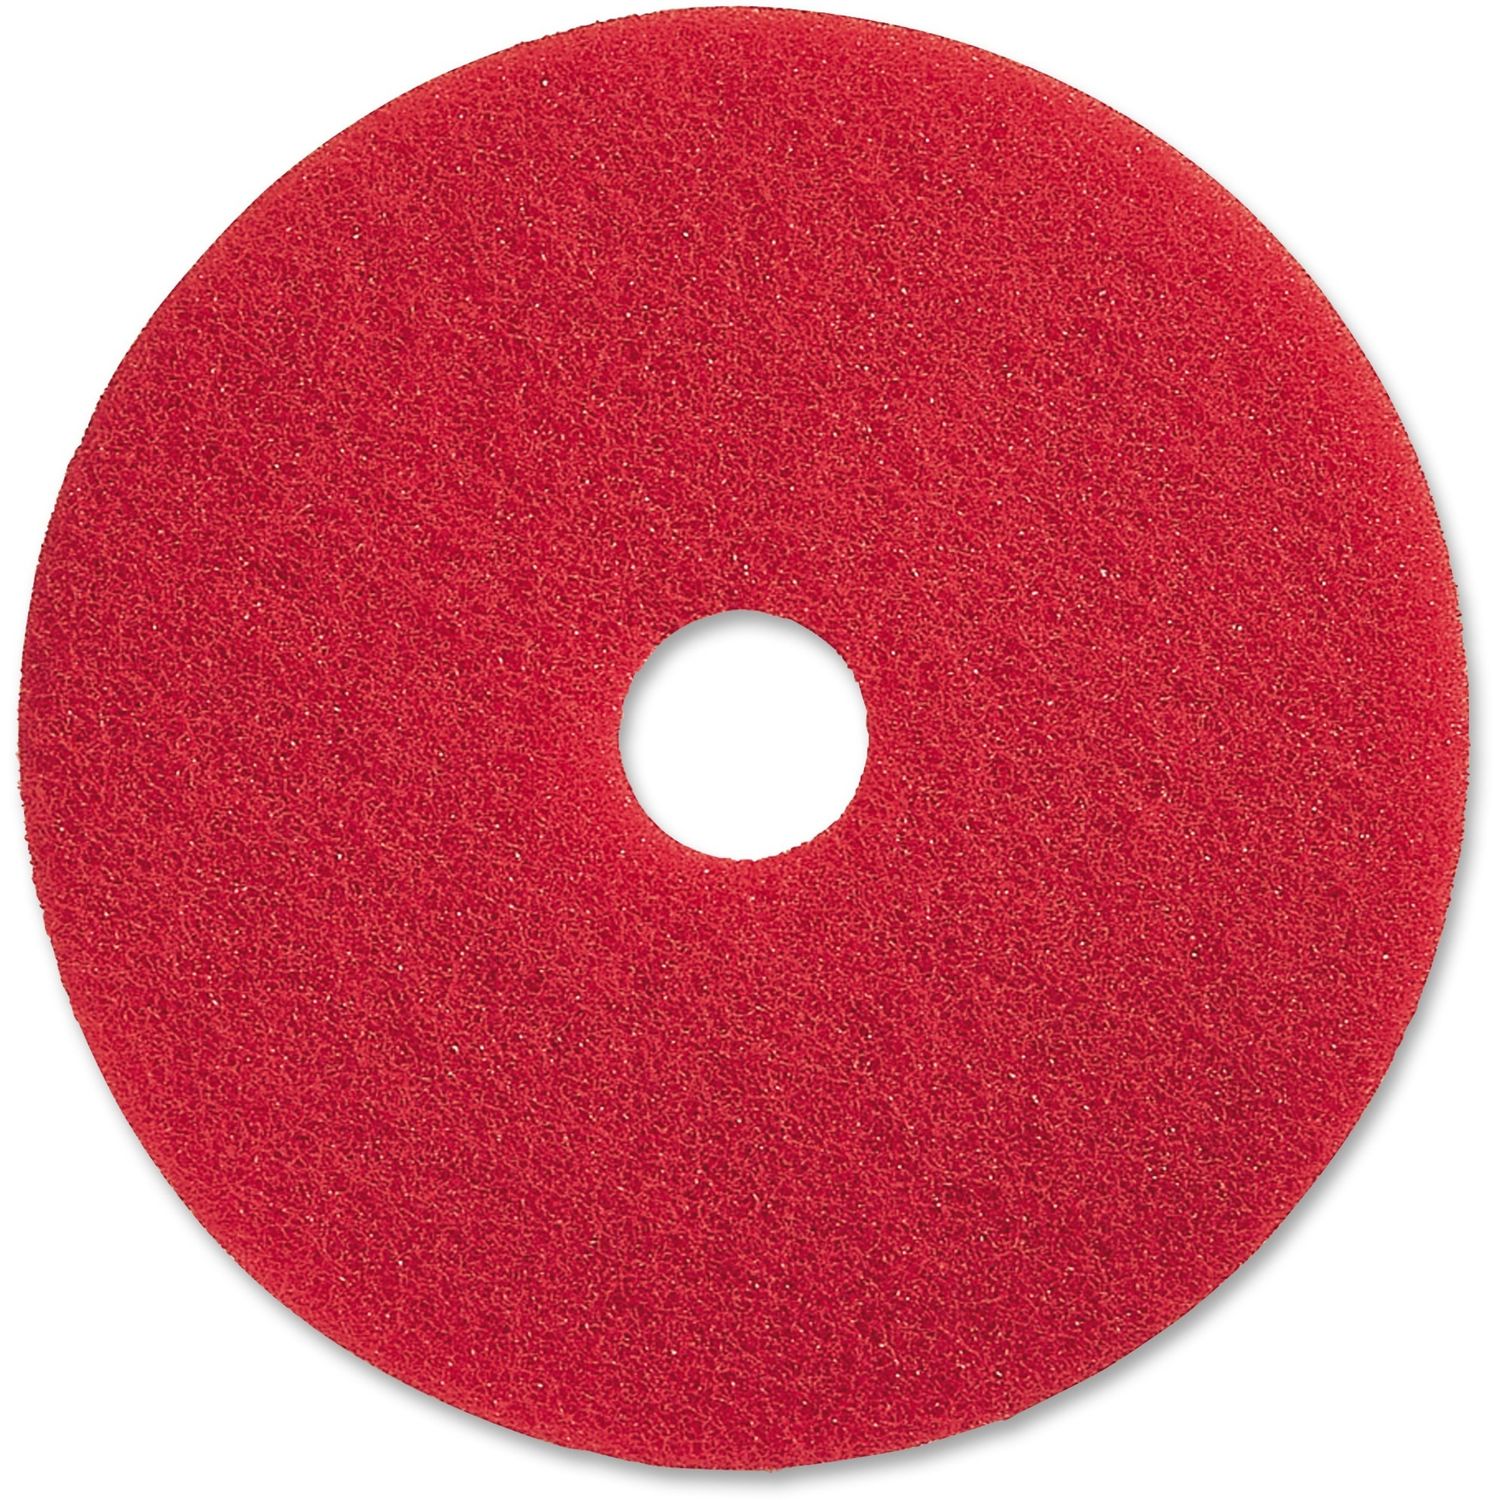 Red Buffing Floor Pad 17" Diameter, 5/Carton x 17" Diameter x 1" Thickness, Buffing, Scrubbing, Floor, 175 rpm to 350 rpm Speed Supported, Flexible, Resilient, Rotate, Dirt Remover, Fiber, Red